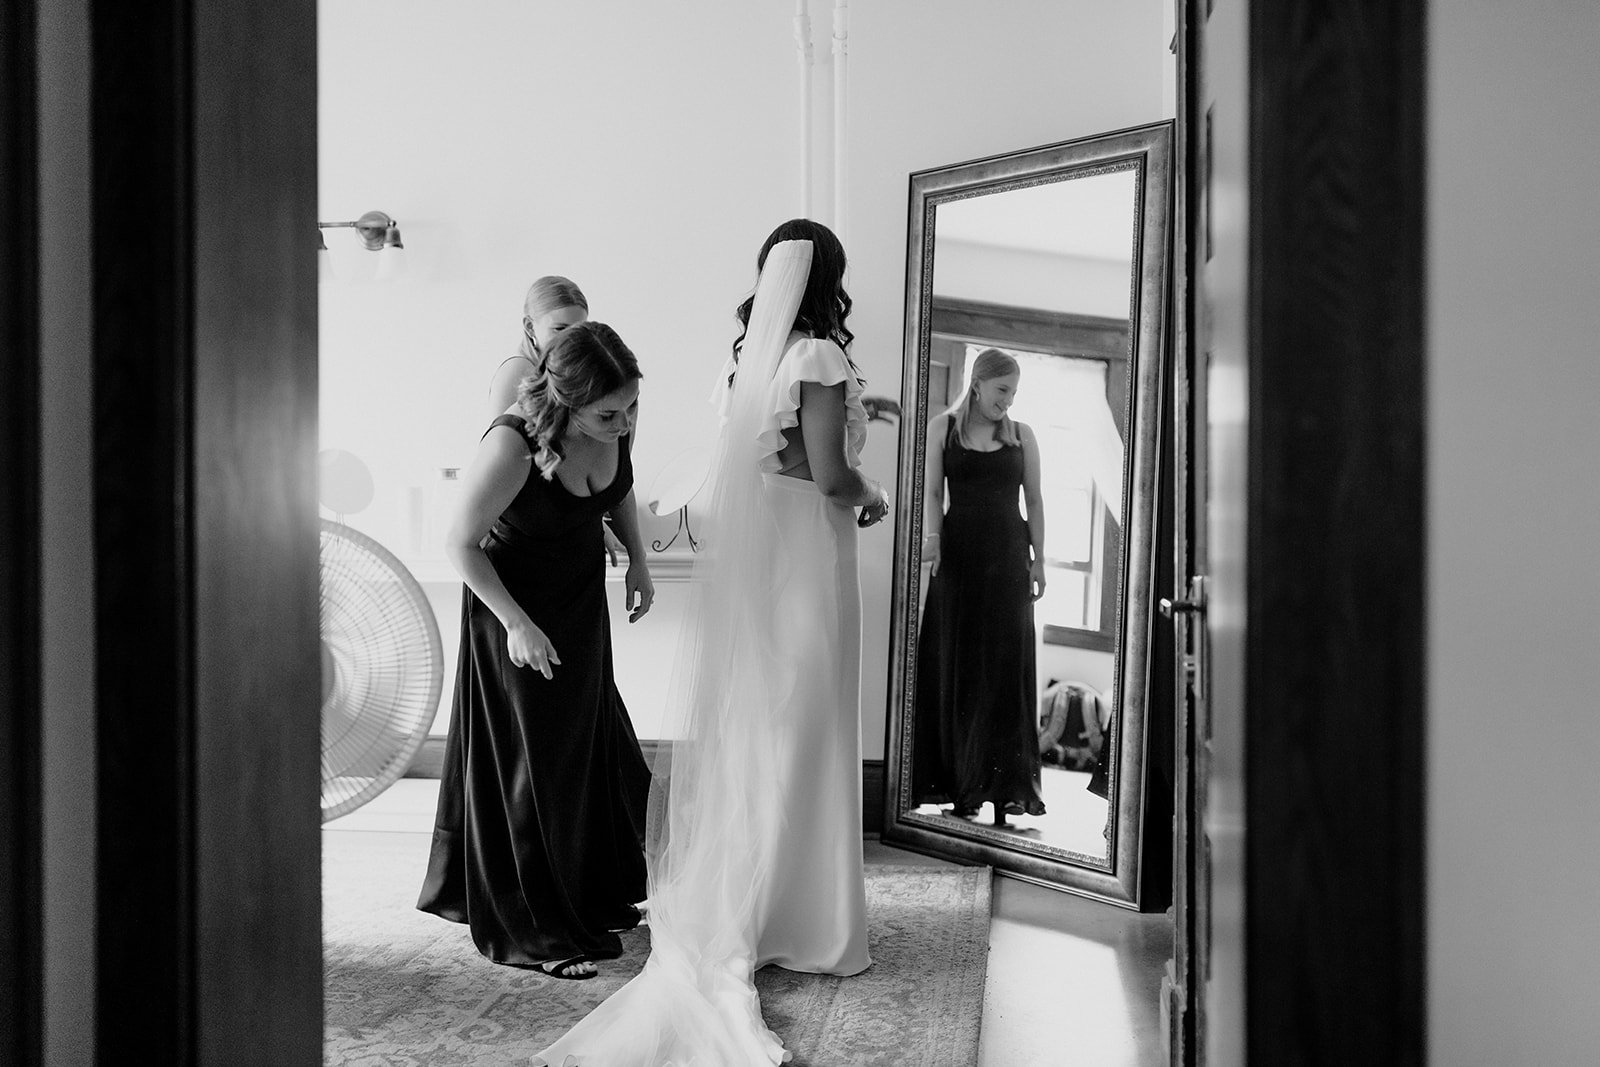 the bride getting ready with bridesmaids in this classic black and white image